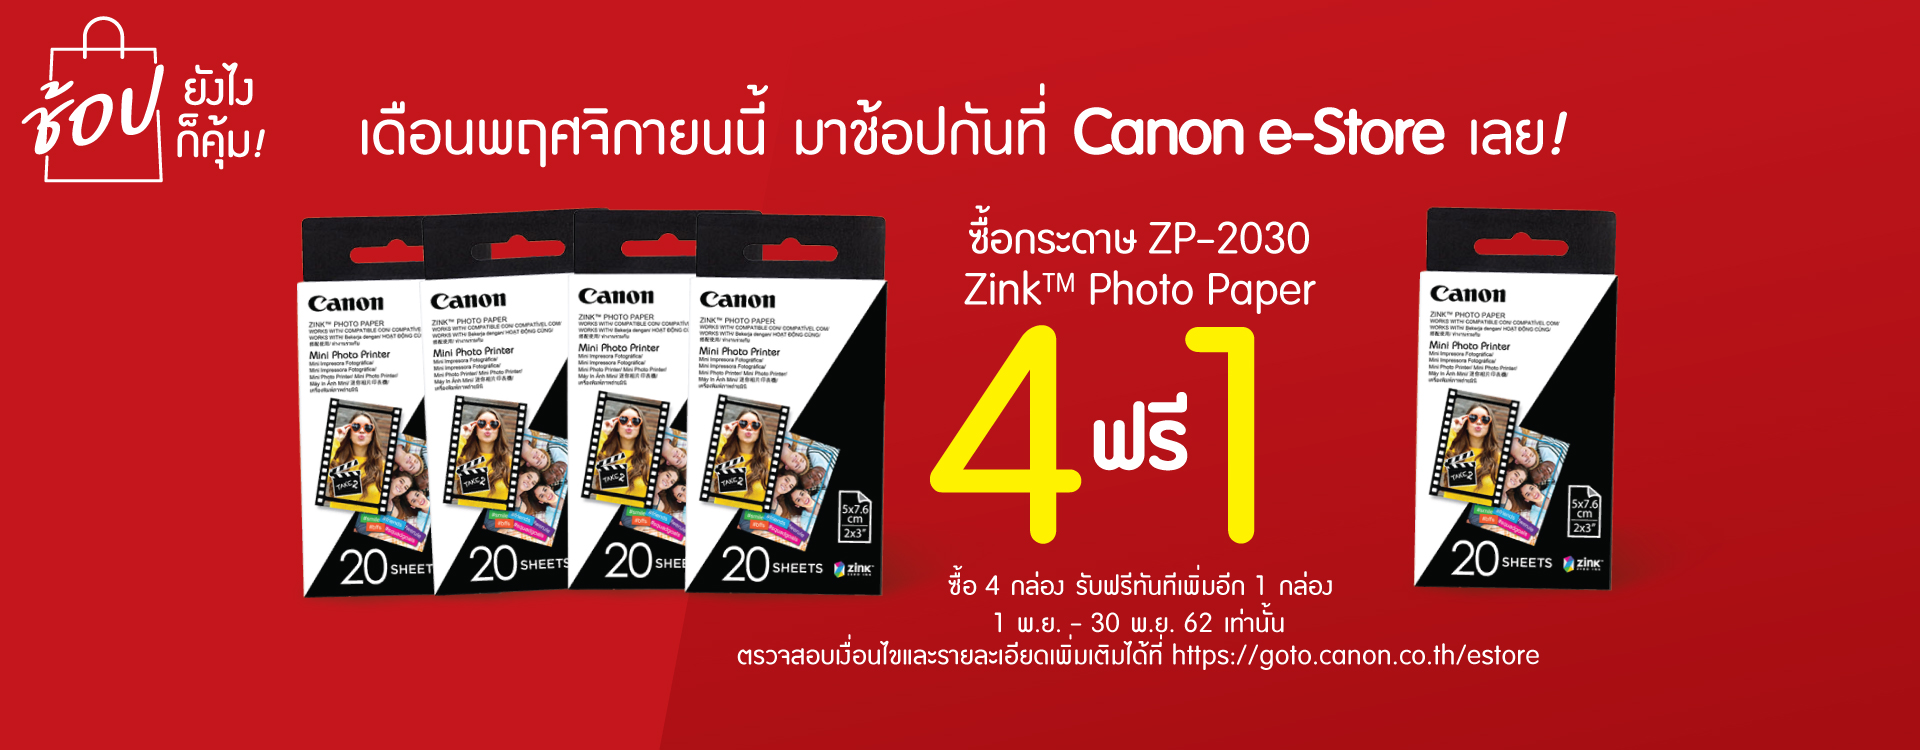 Home Canon Thailand - asoc fort campbell usar roblox